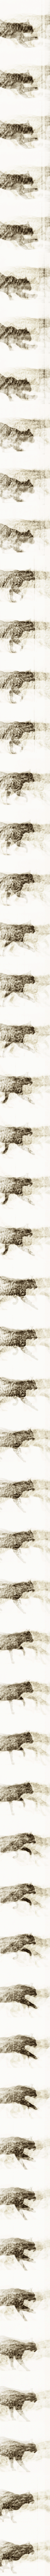 Cat Trotting, Changing To A Gallop (Soft-Light-6-0.132-129)